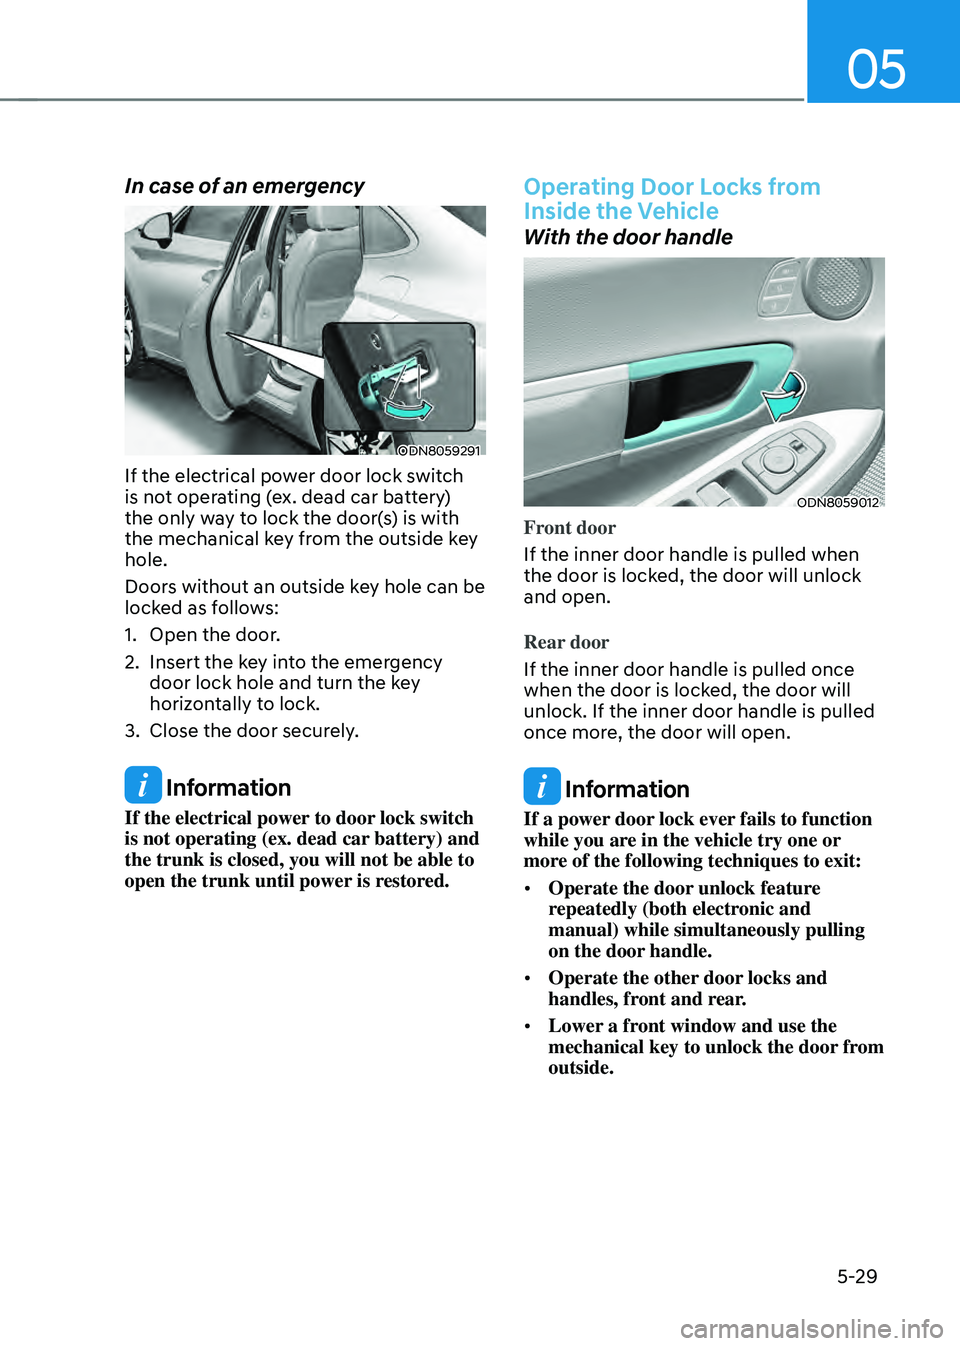 HYUNDAI SONATA HYBRID 2022  Owners Manual 05
5-29
In case of an emergency 
ODN8059291
If the electrical power door lock switch 
is not operating (ex. dead car battery) 
the only way to lock the door(s) is with 
the mechanical key from the out